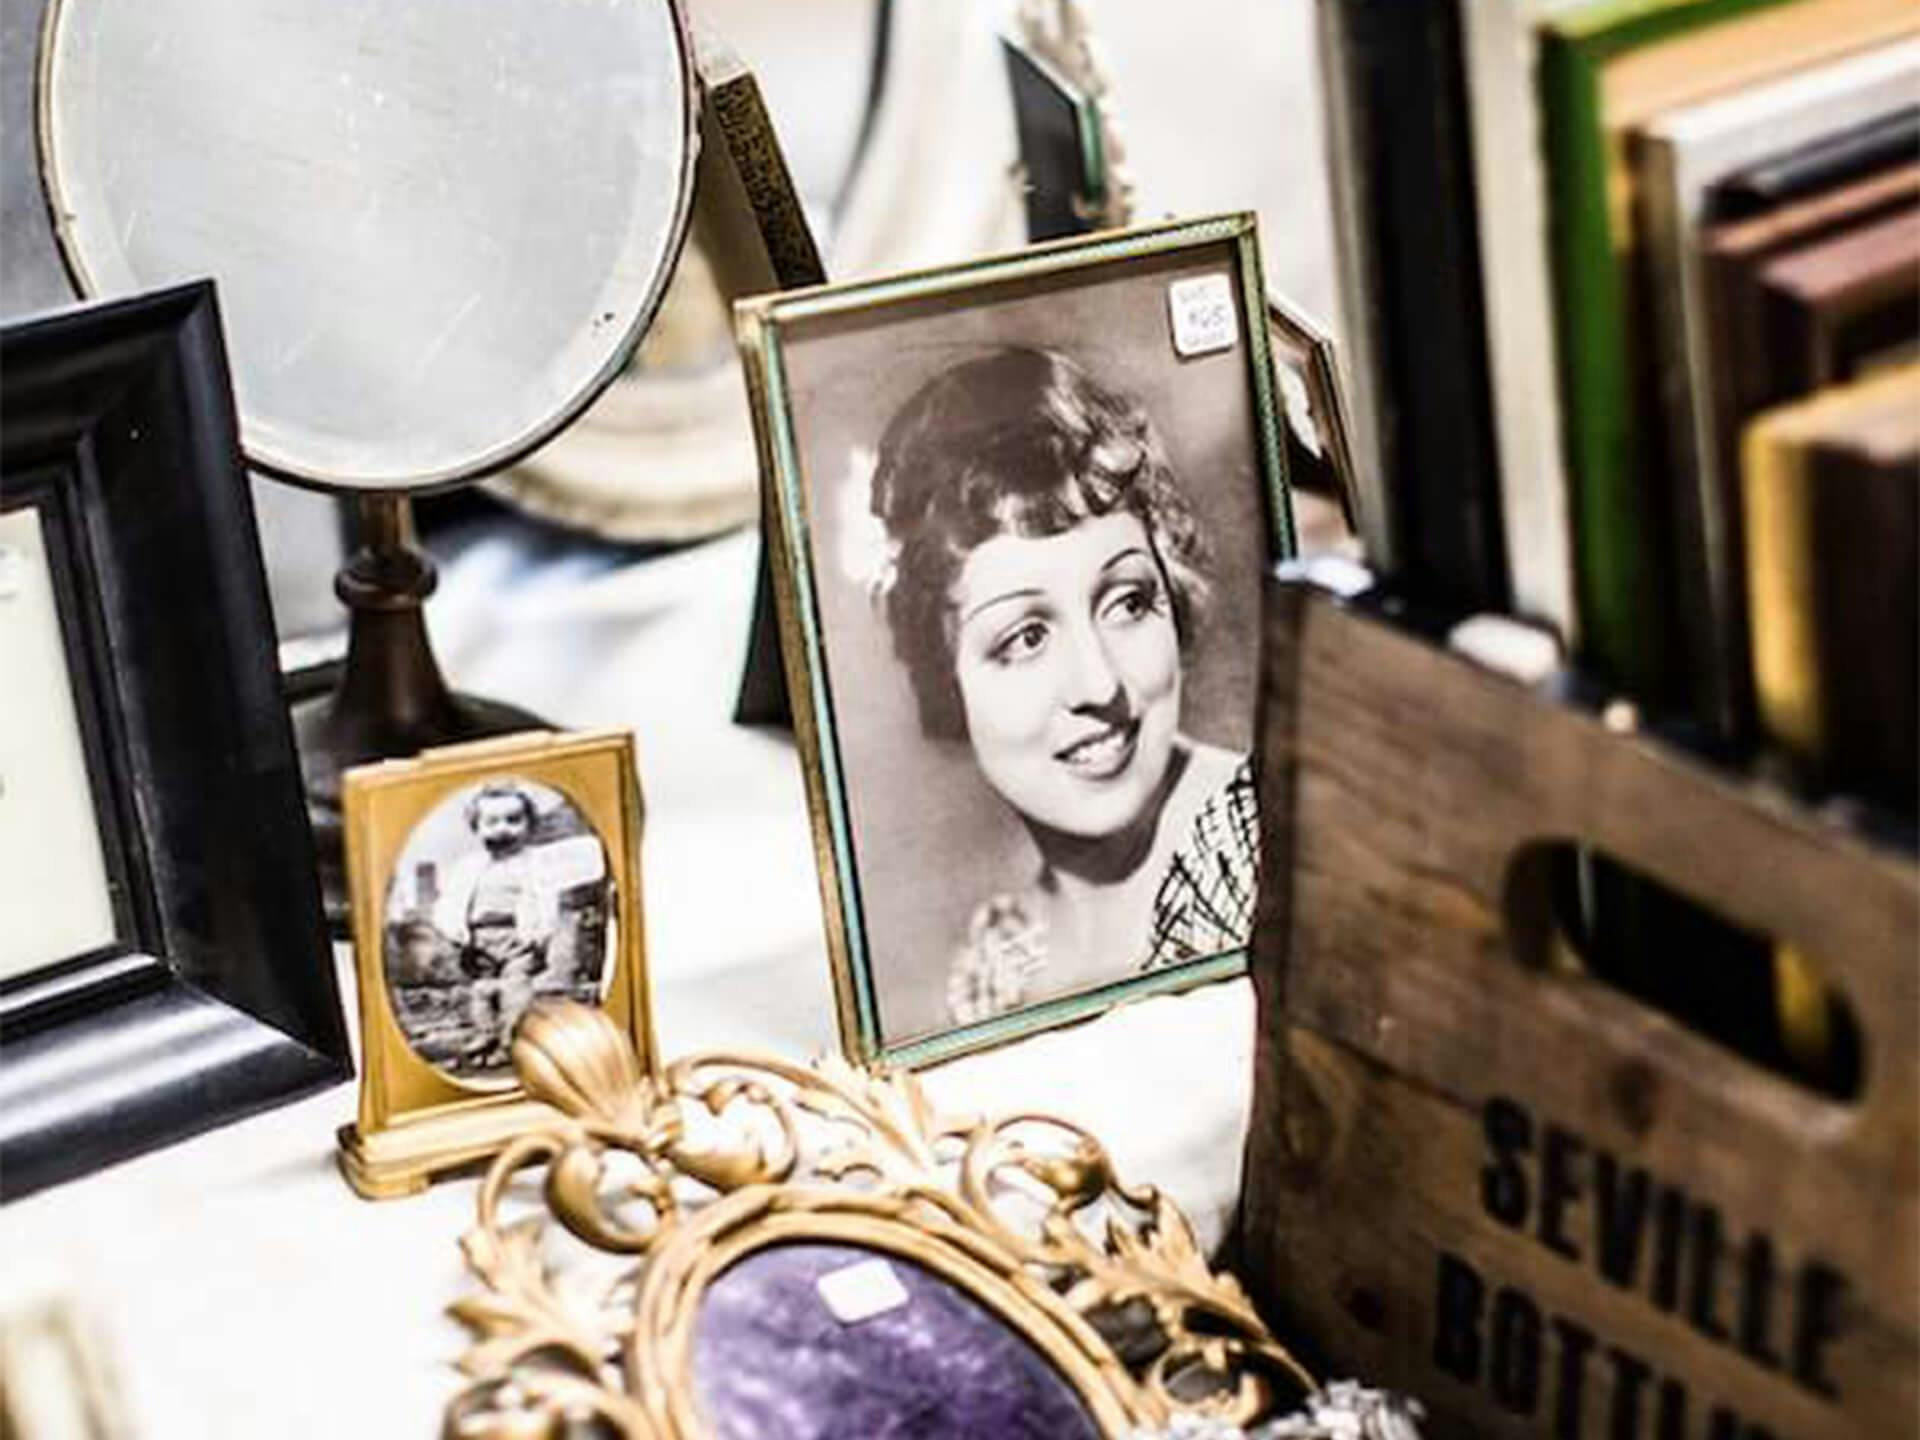 A lifestyle shot of vintage framed photos, hand held mirrors, and books 